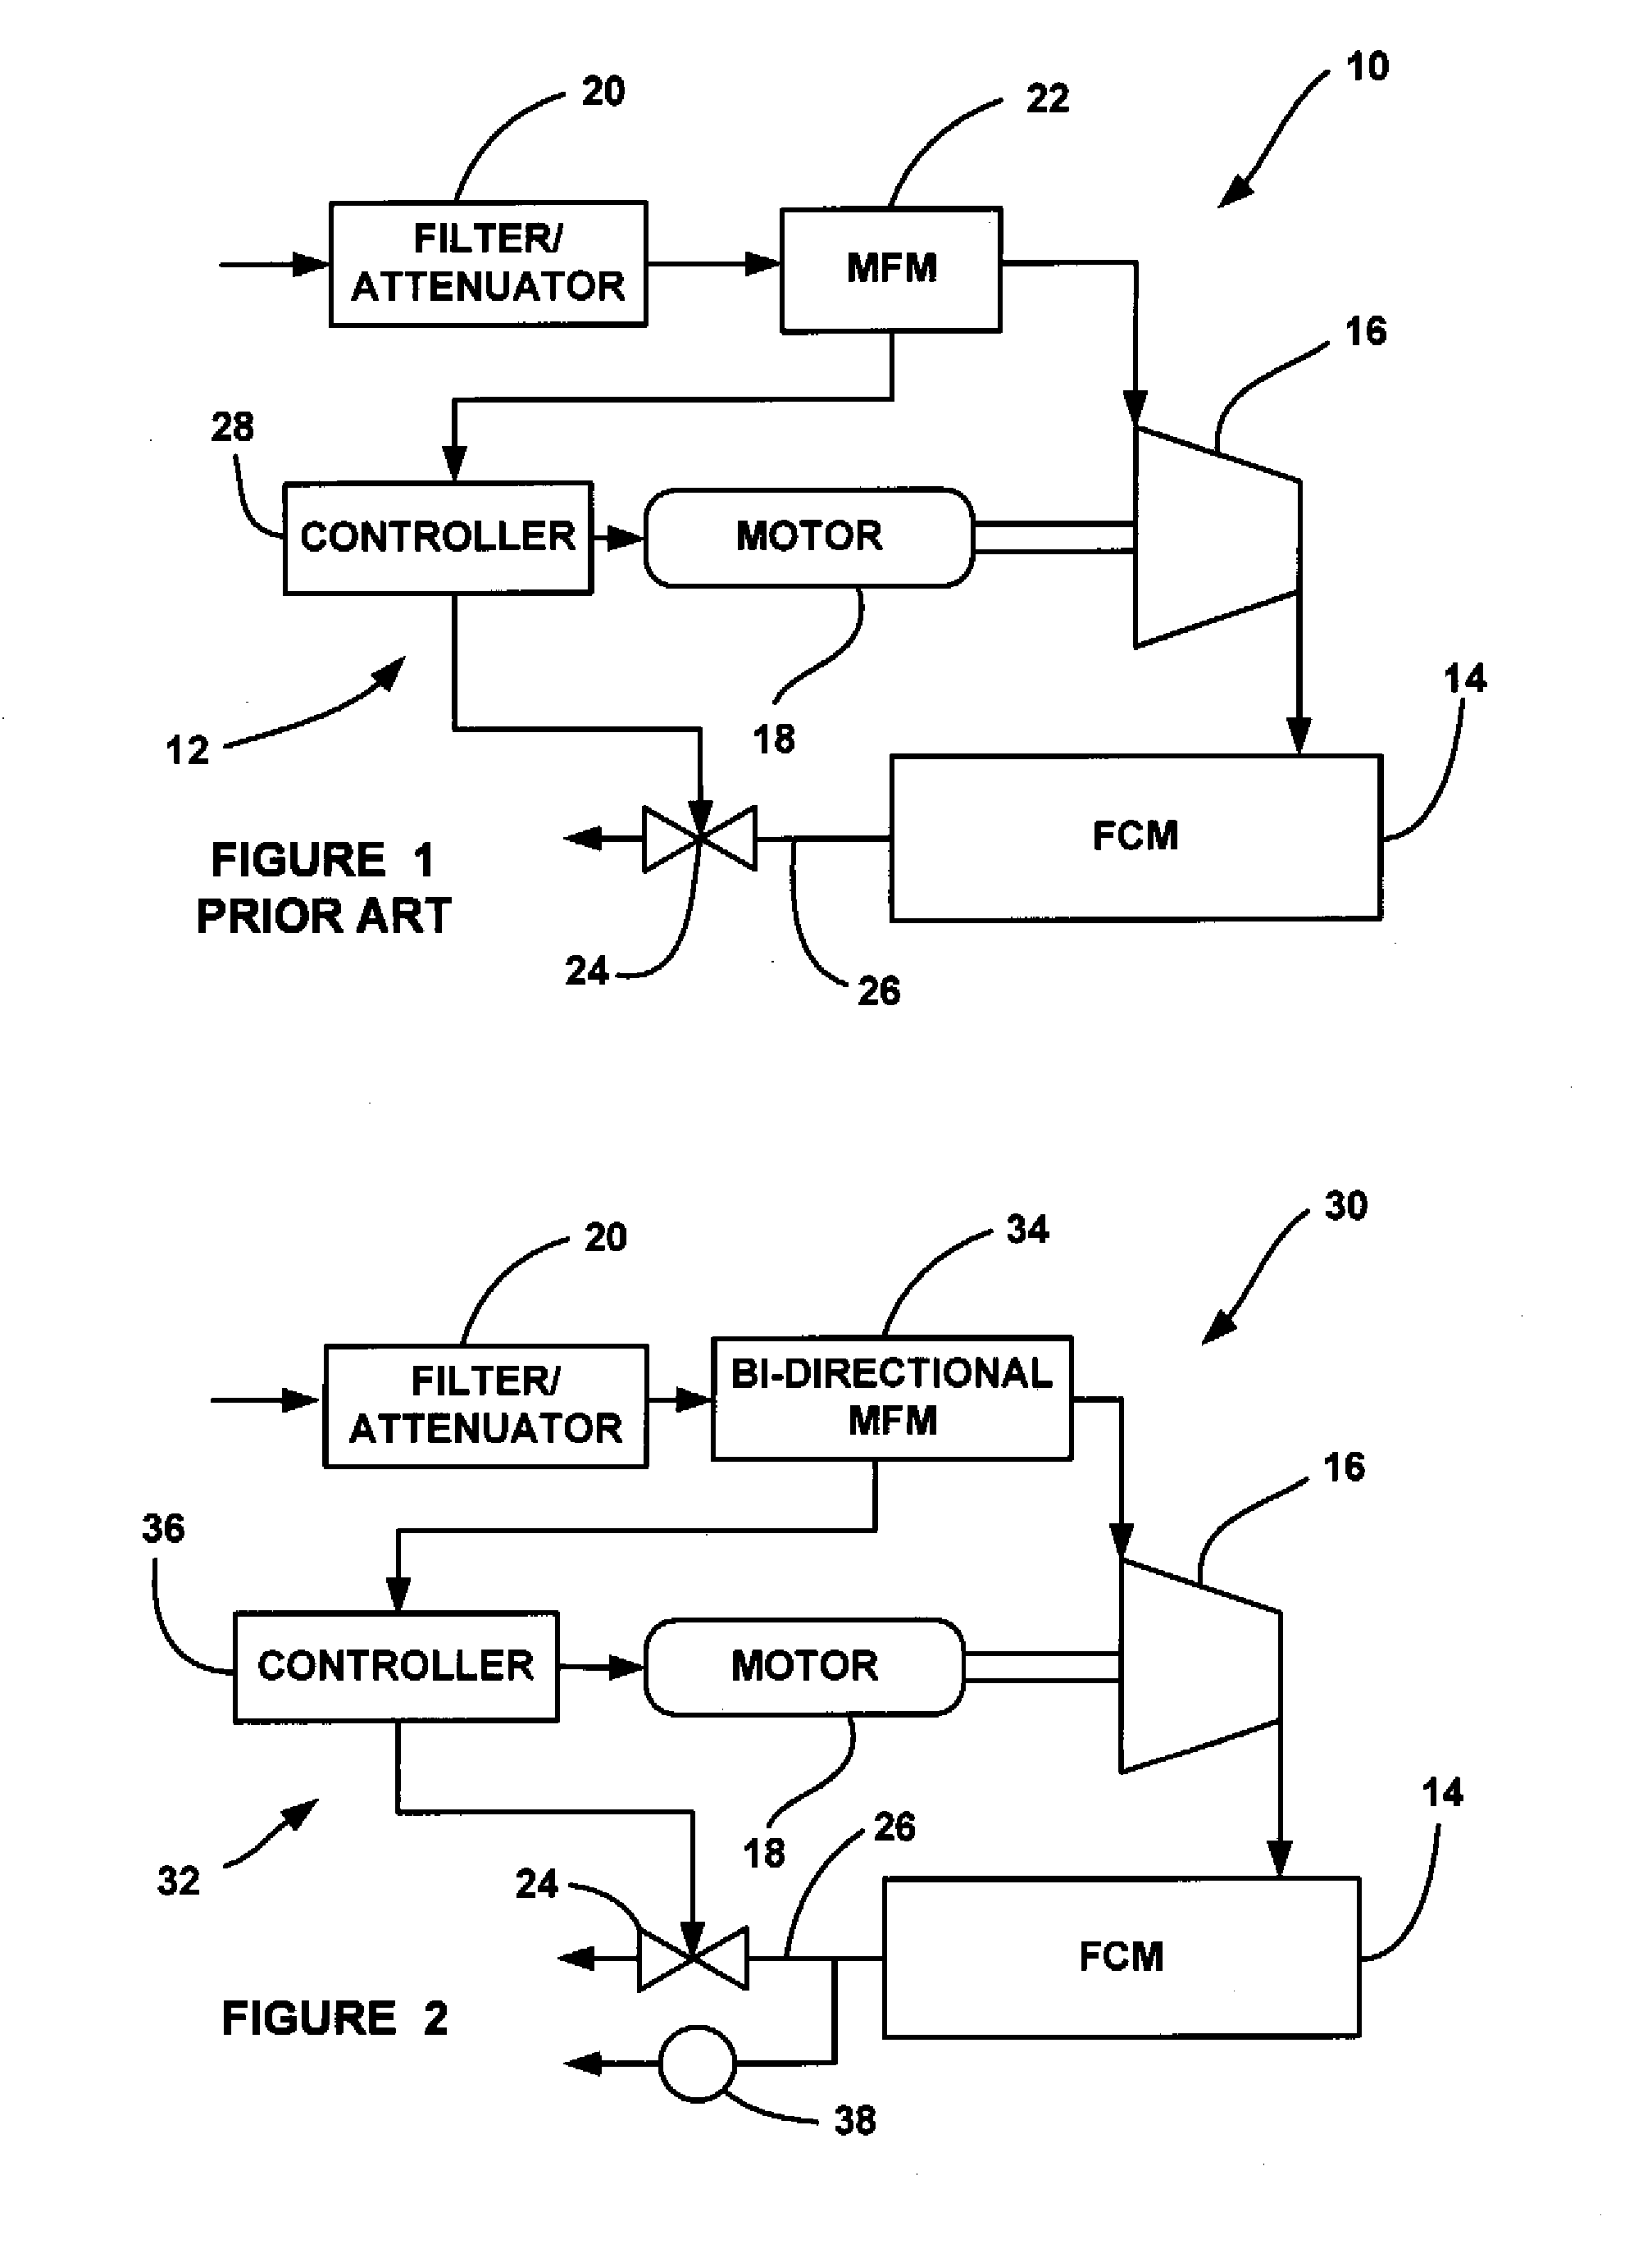 Method for Detecting Compressor Surge in a Fuel Cell System Using a Mass Flow Meter